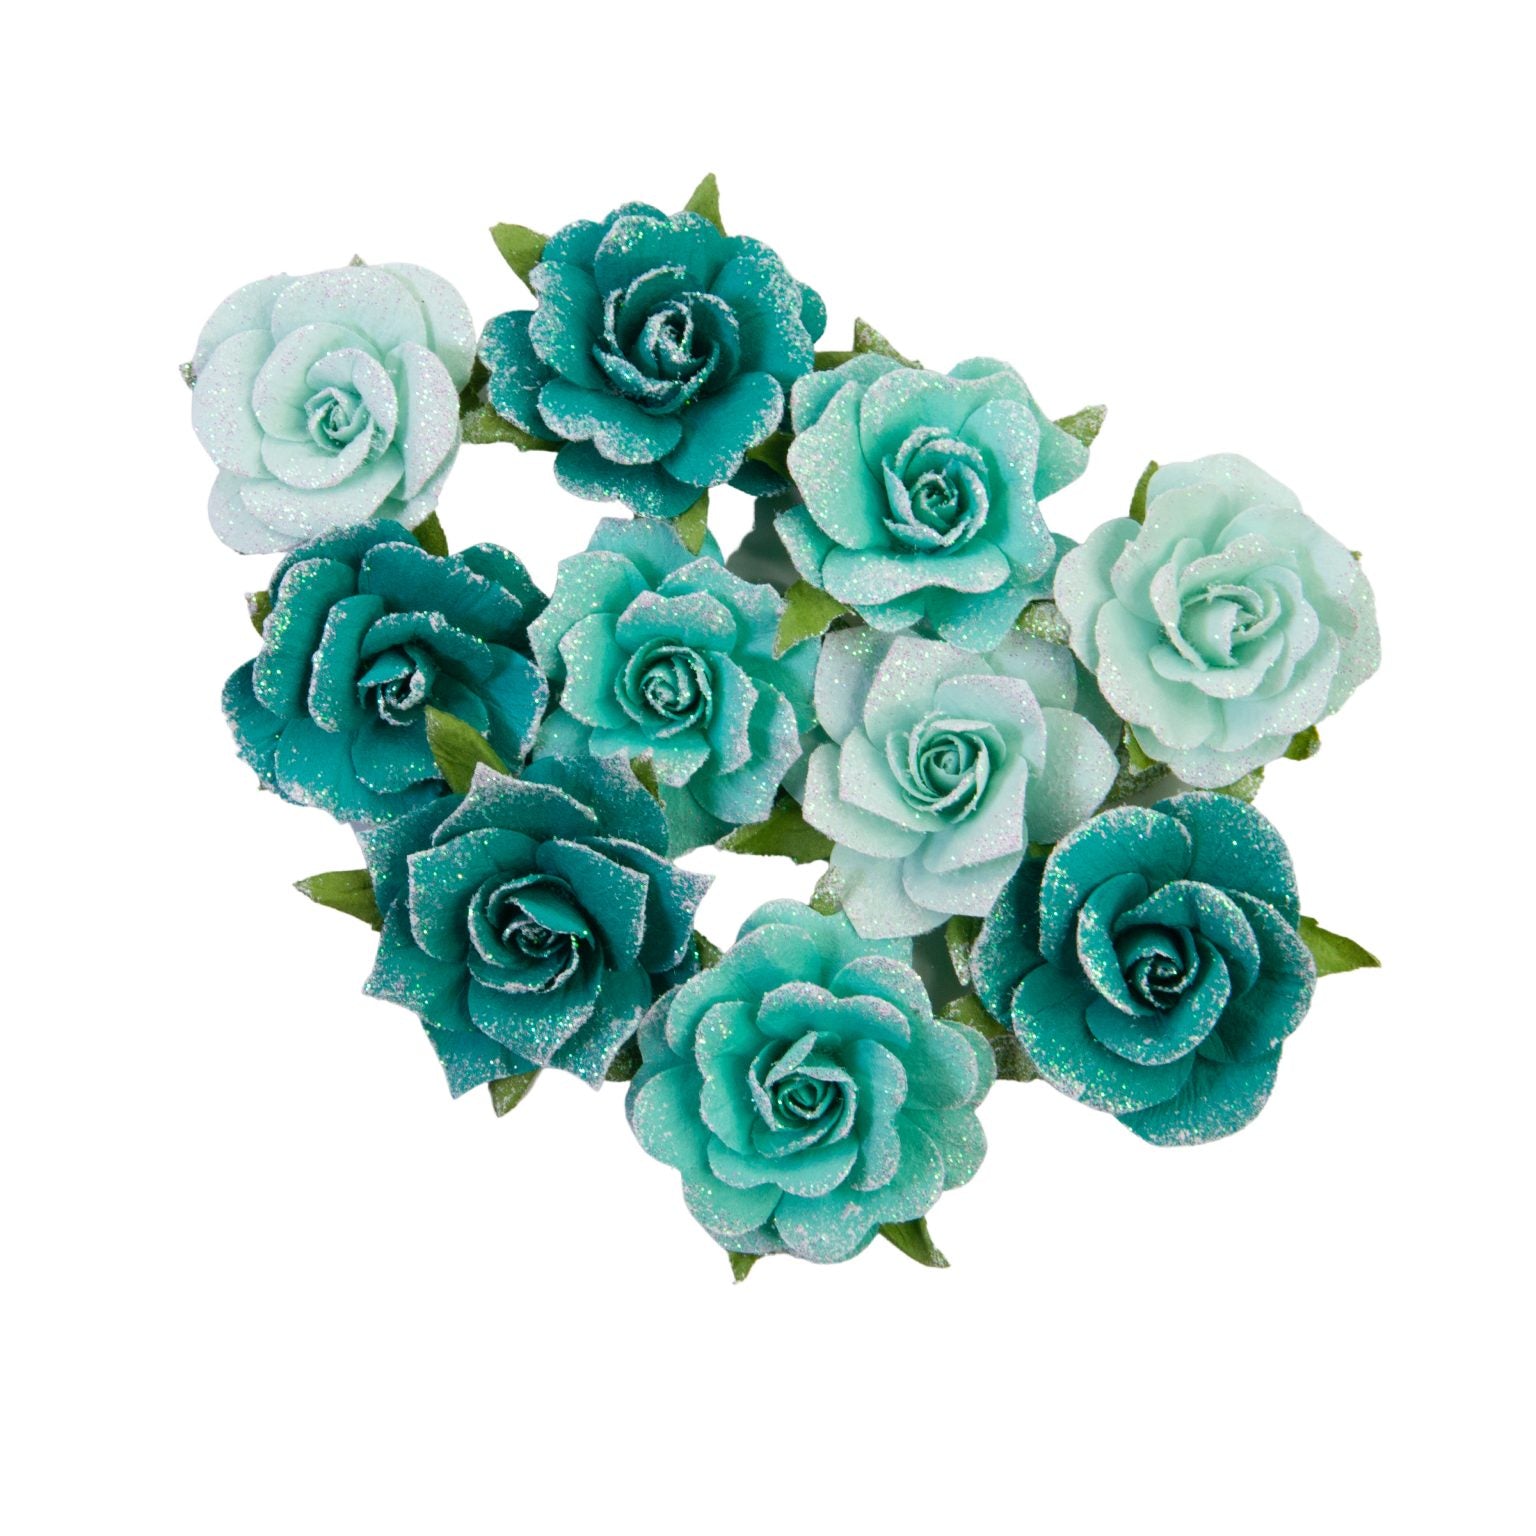 Prima Flowers  Painted floral collection  shiny teal